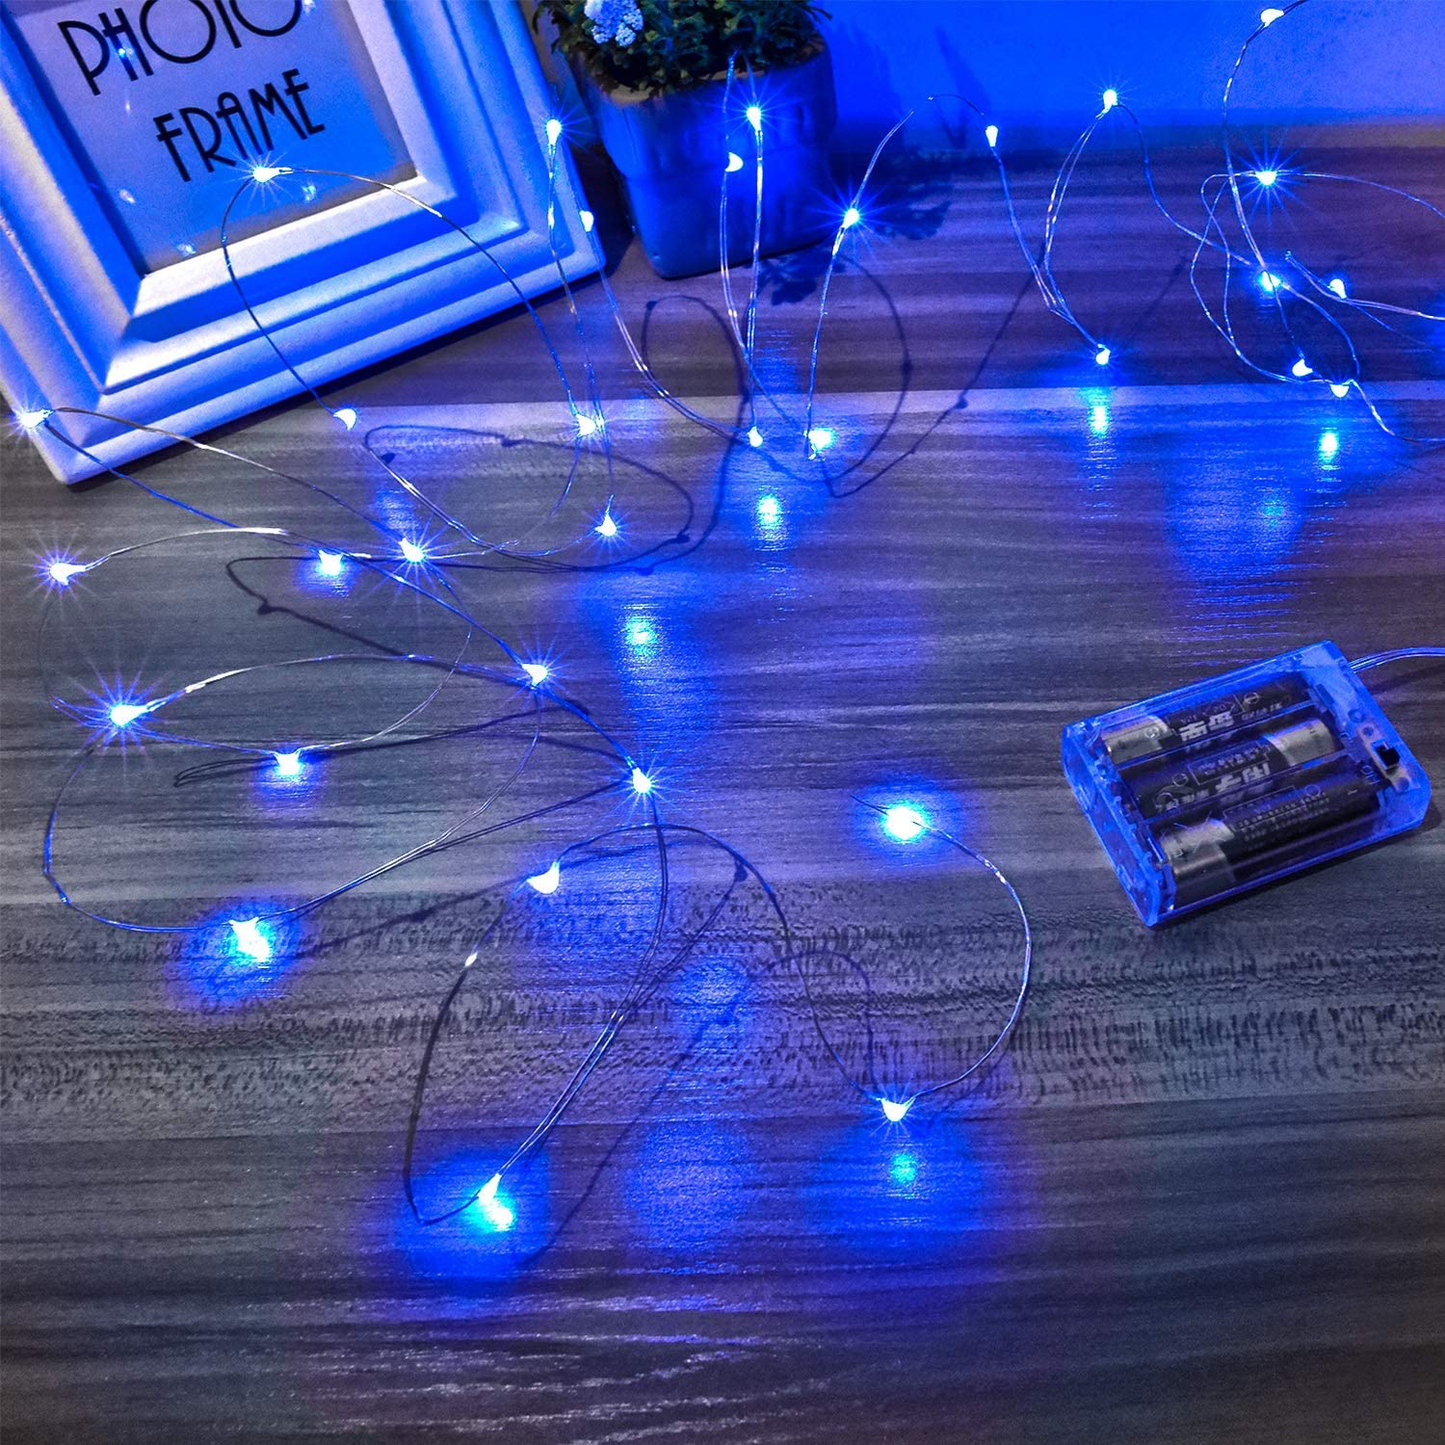 Ariceleo Led Fairy Lights Battery Operated, 1 Pack Mini Battery Powered Copper Wire Starry Fairy Lights for Bedroom, Christmas, Parties, Wedding, Centerpiece, Decoration (5m/16ft Warm White)